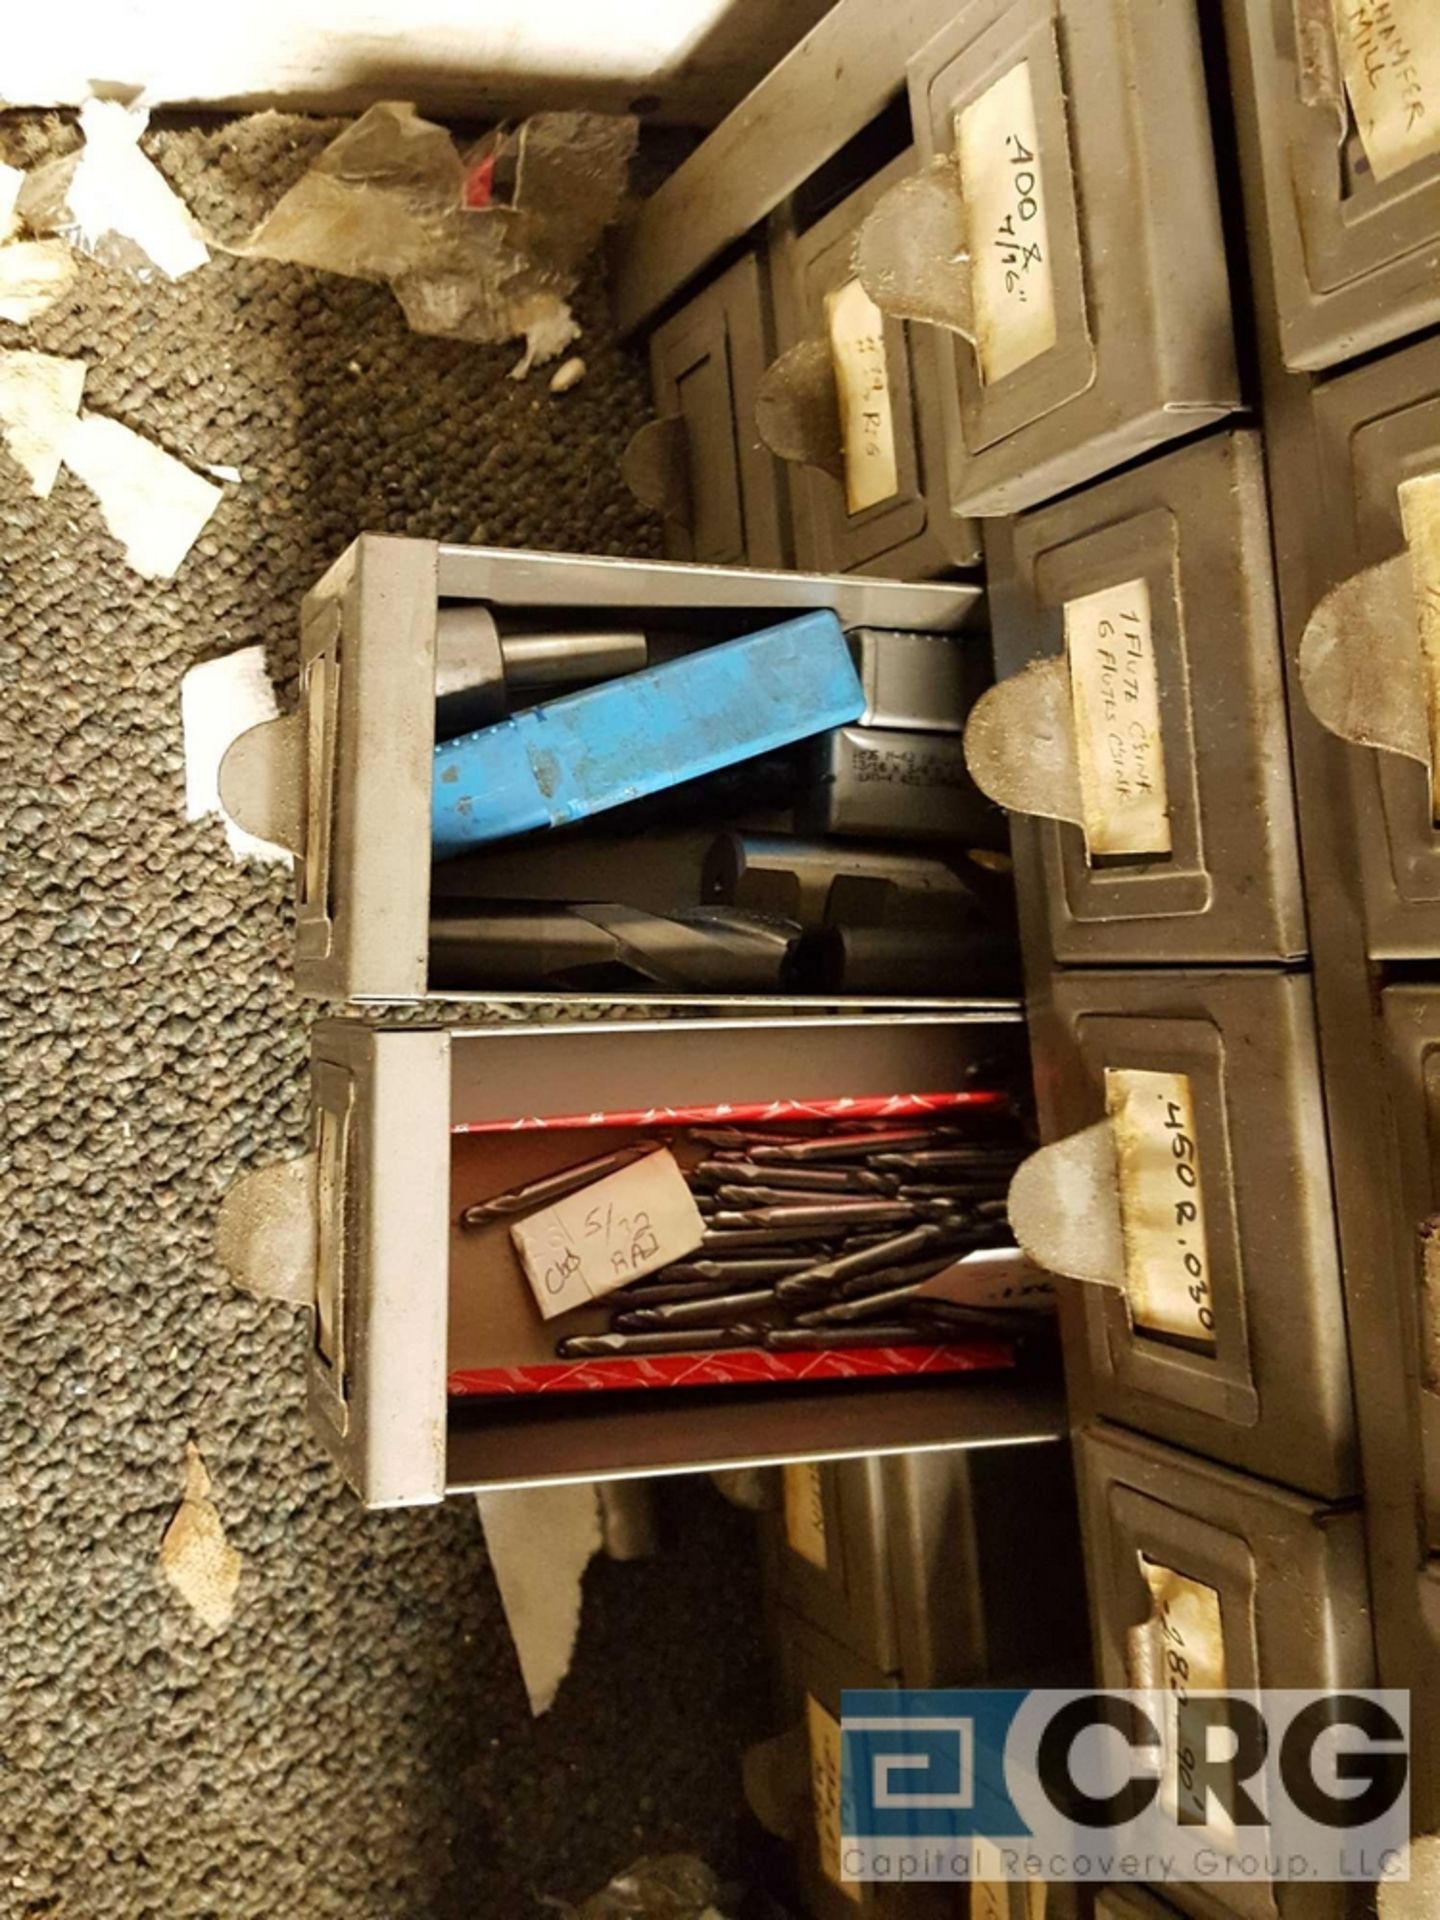 Lot includes (2) cabinets and contents of assorted end mills and cutting tools etc. - Image 16 of 28